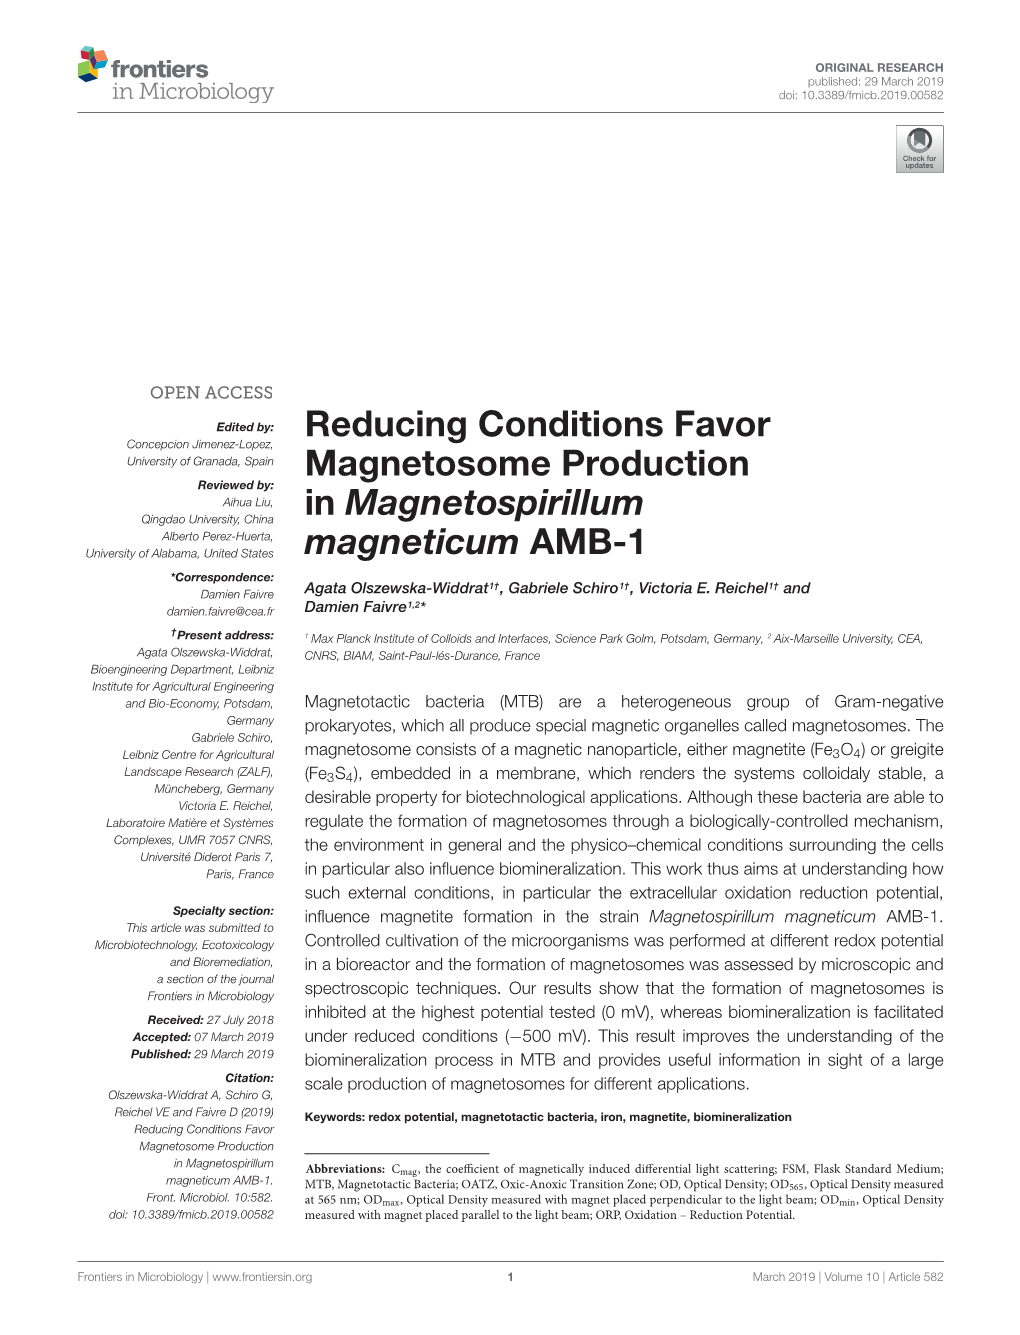 Reducing Conditions Favor Magnetosome Production In